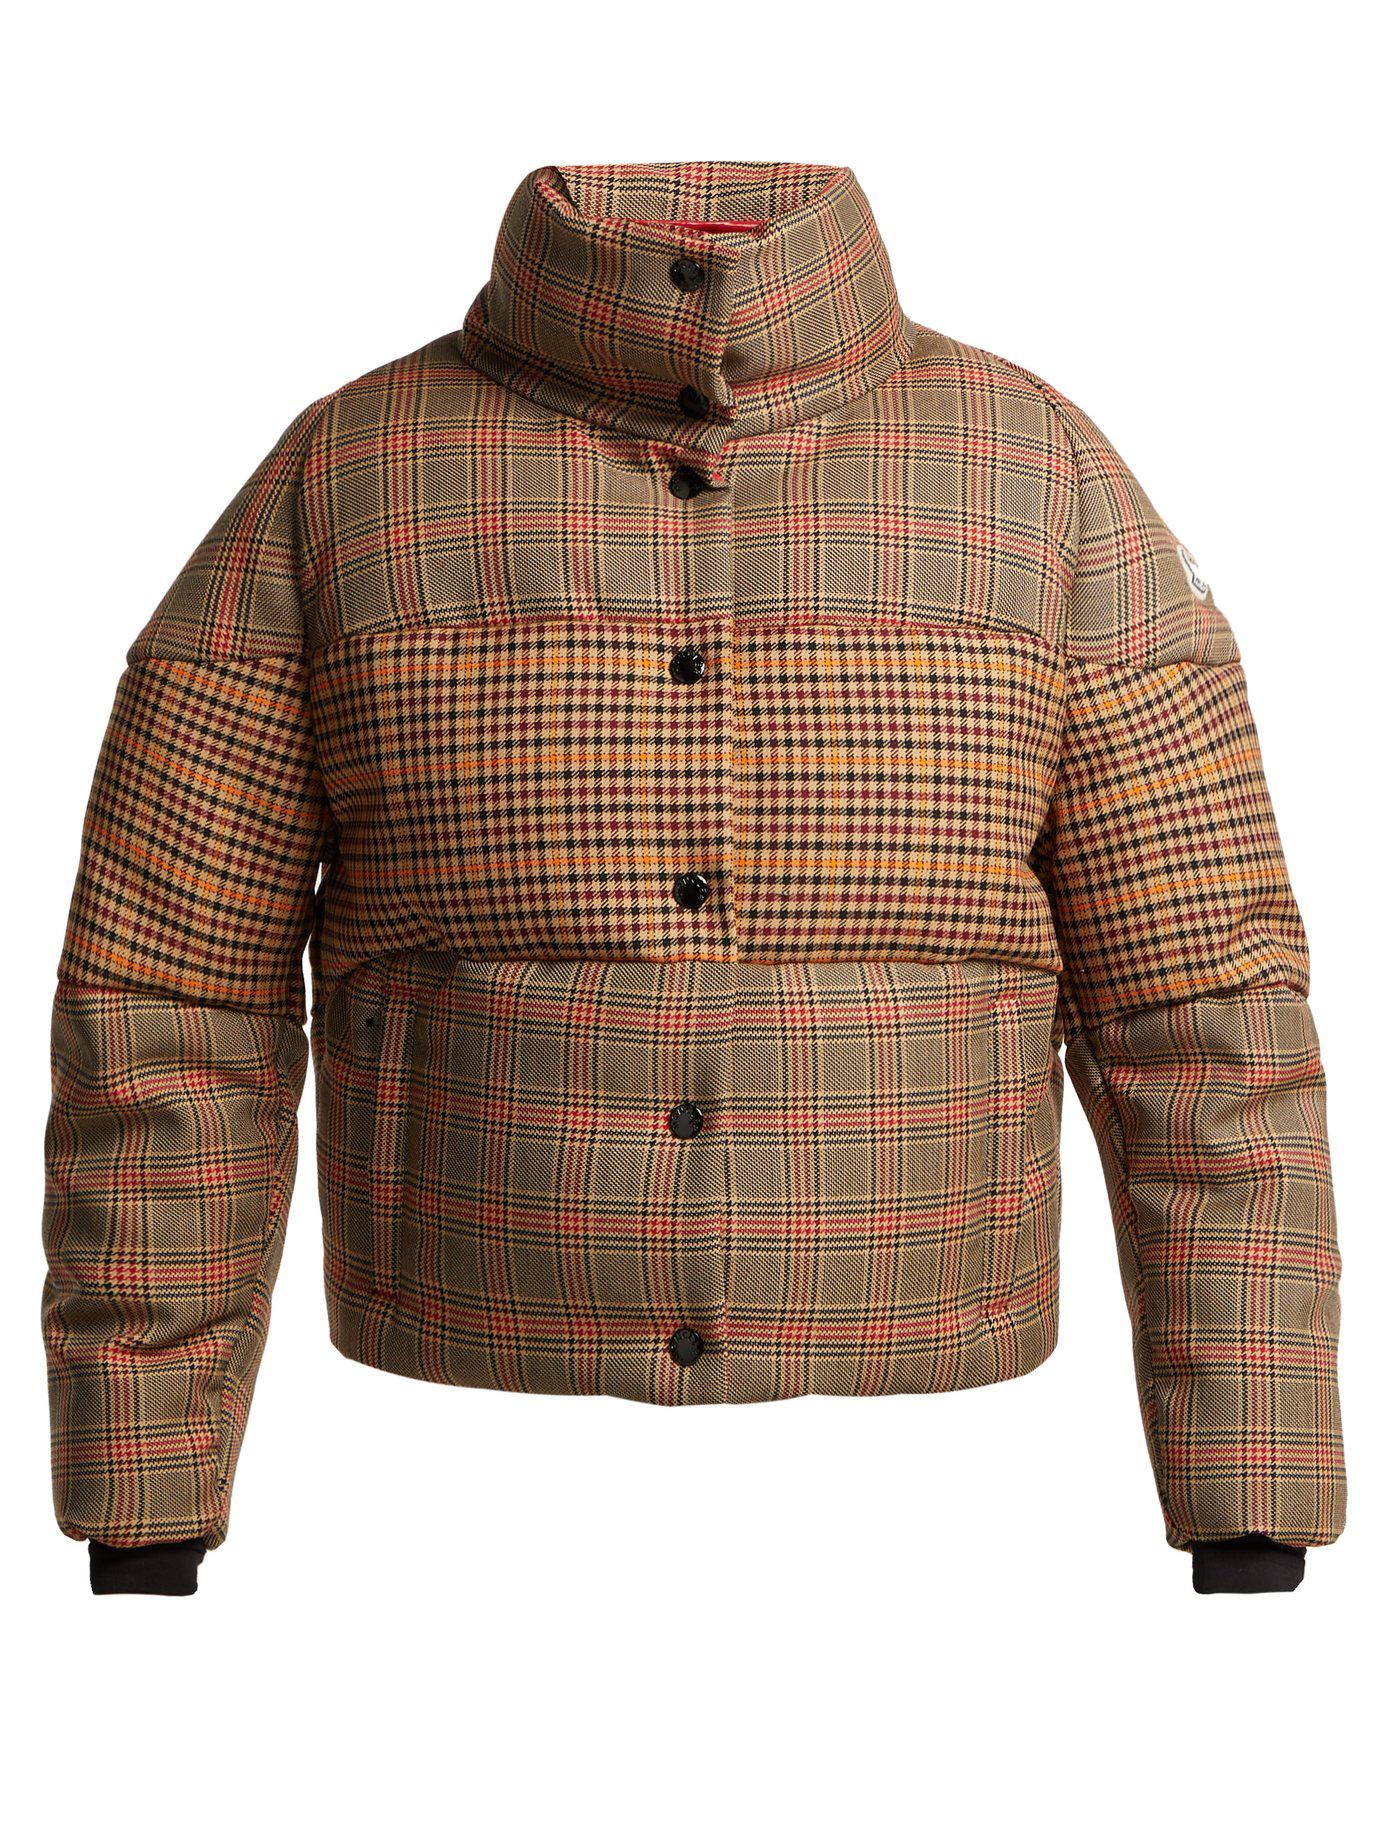 Moncler Cer Checked Wool Blend Jacket in Brown - Lyst